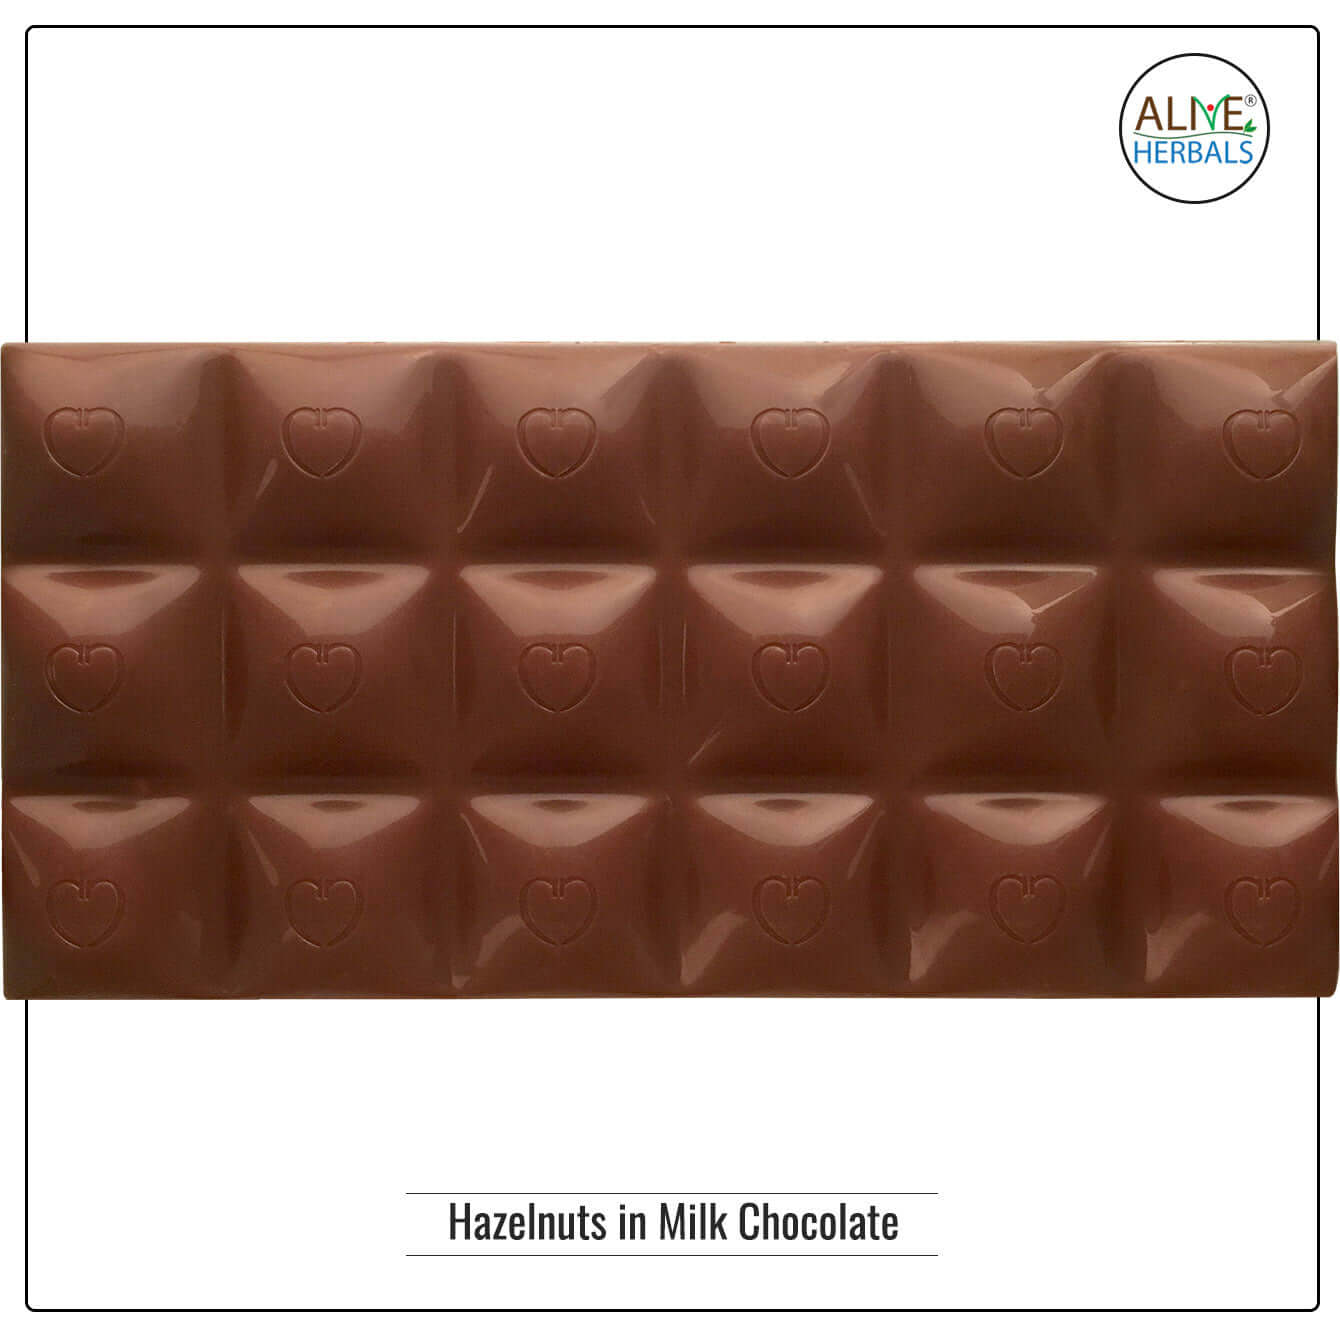 Hazelnuts in Milk Chocolate - Buy at Natural Food Store | Alive Herbals.